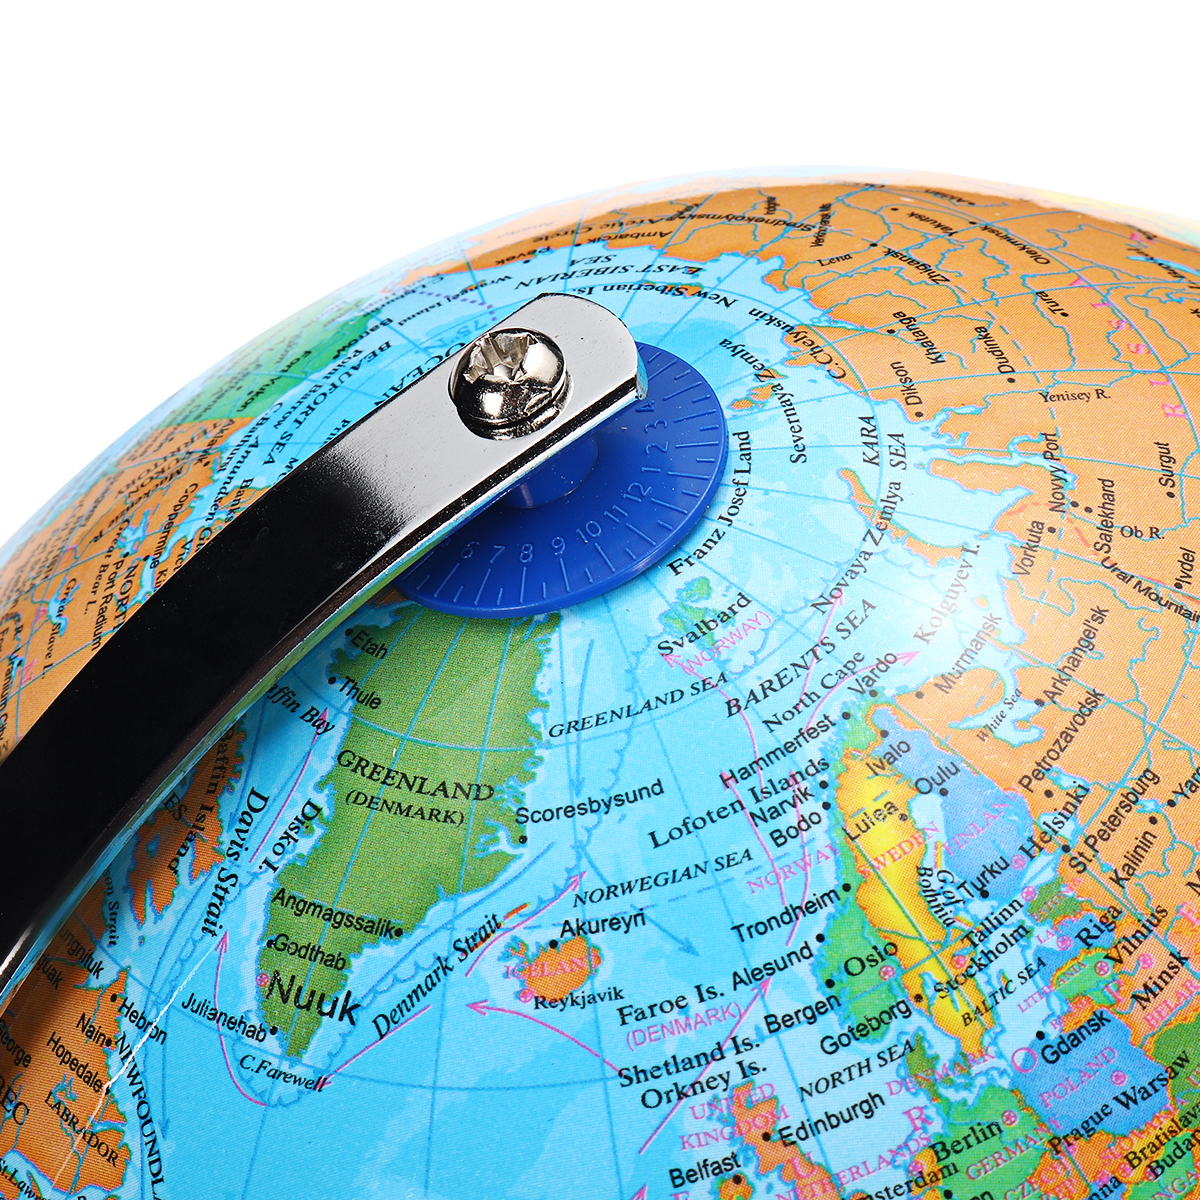 Find 8inch Stand Rotating World Globe Map Kids Toy School Student Educational Gift for Sale on Gipsybee.com with cryptocurrencies